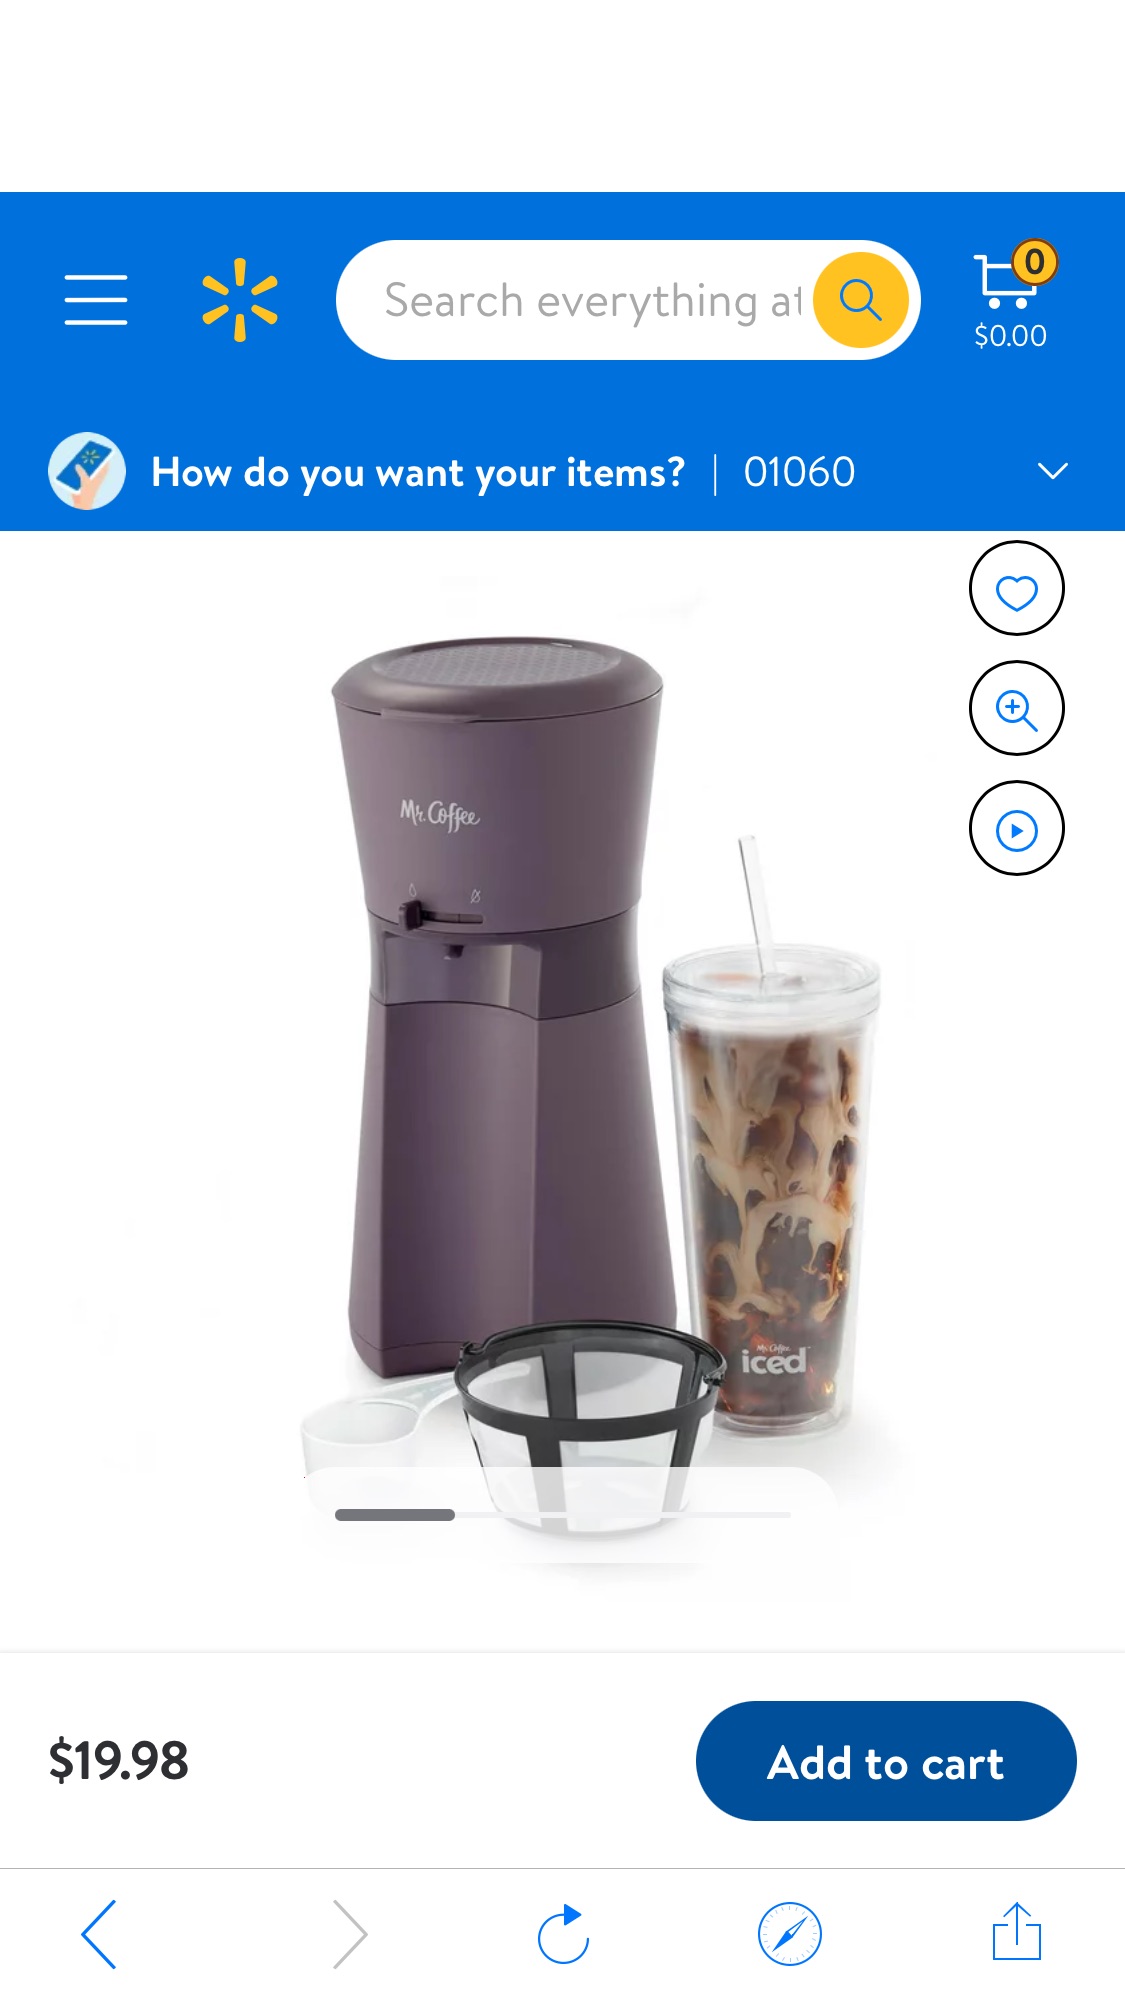 Mr. Coffee® Iced™ Coffee Maker with Reusable Tumbler and Coffee Filter, Lavender咖啡机